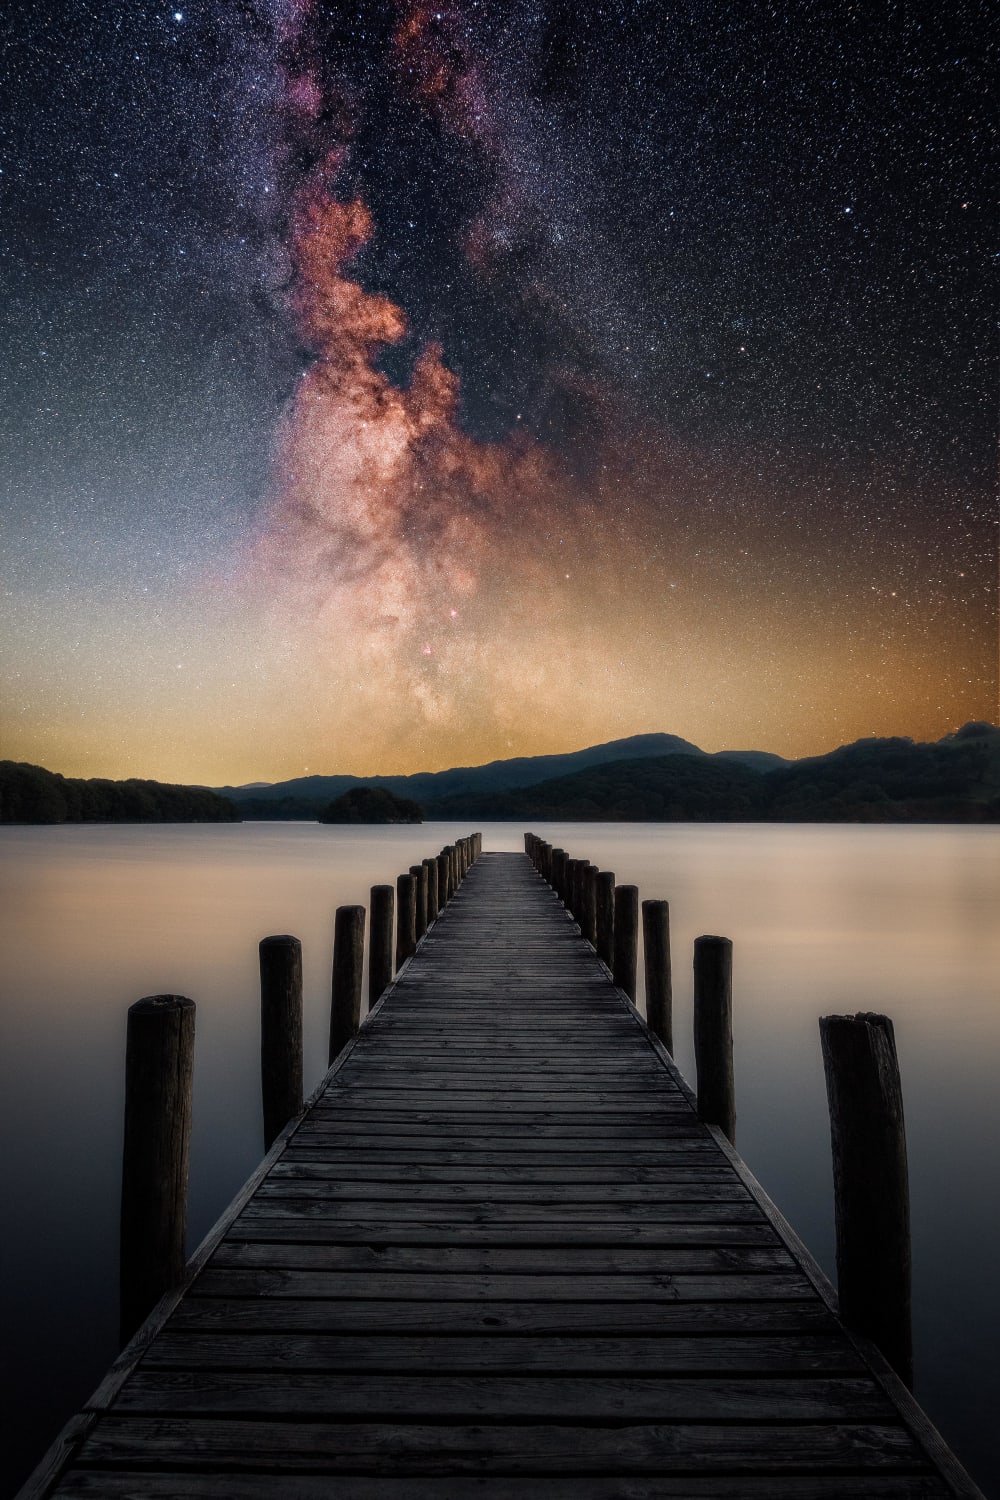 I used my astro-modified camera to shoot the milky way setting over Coniston water in The Lake District, UK